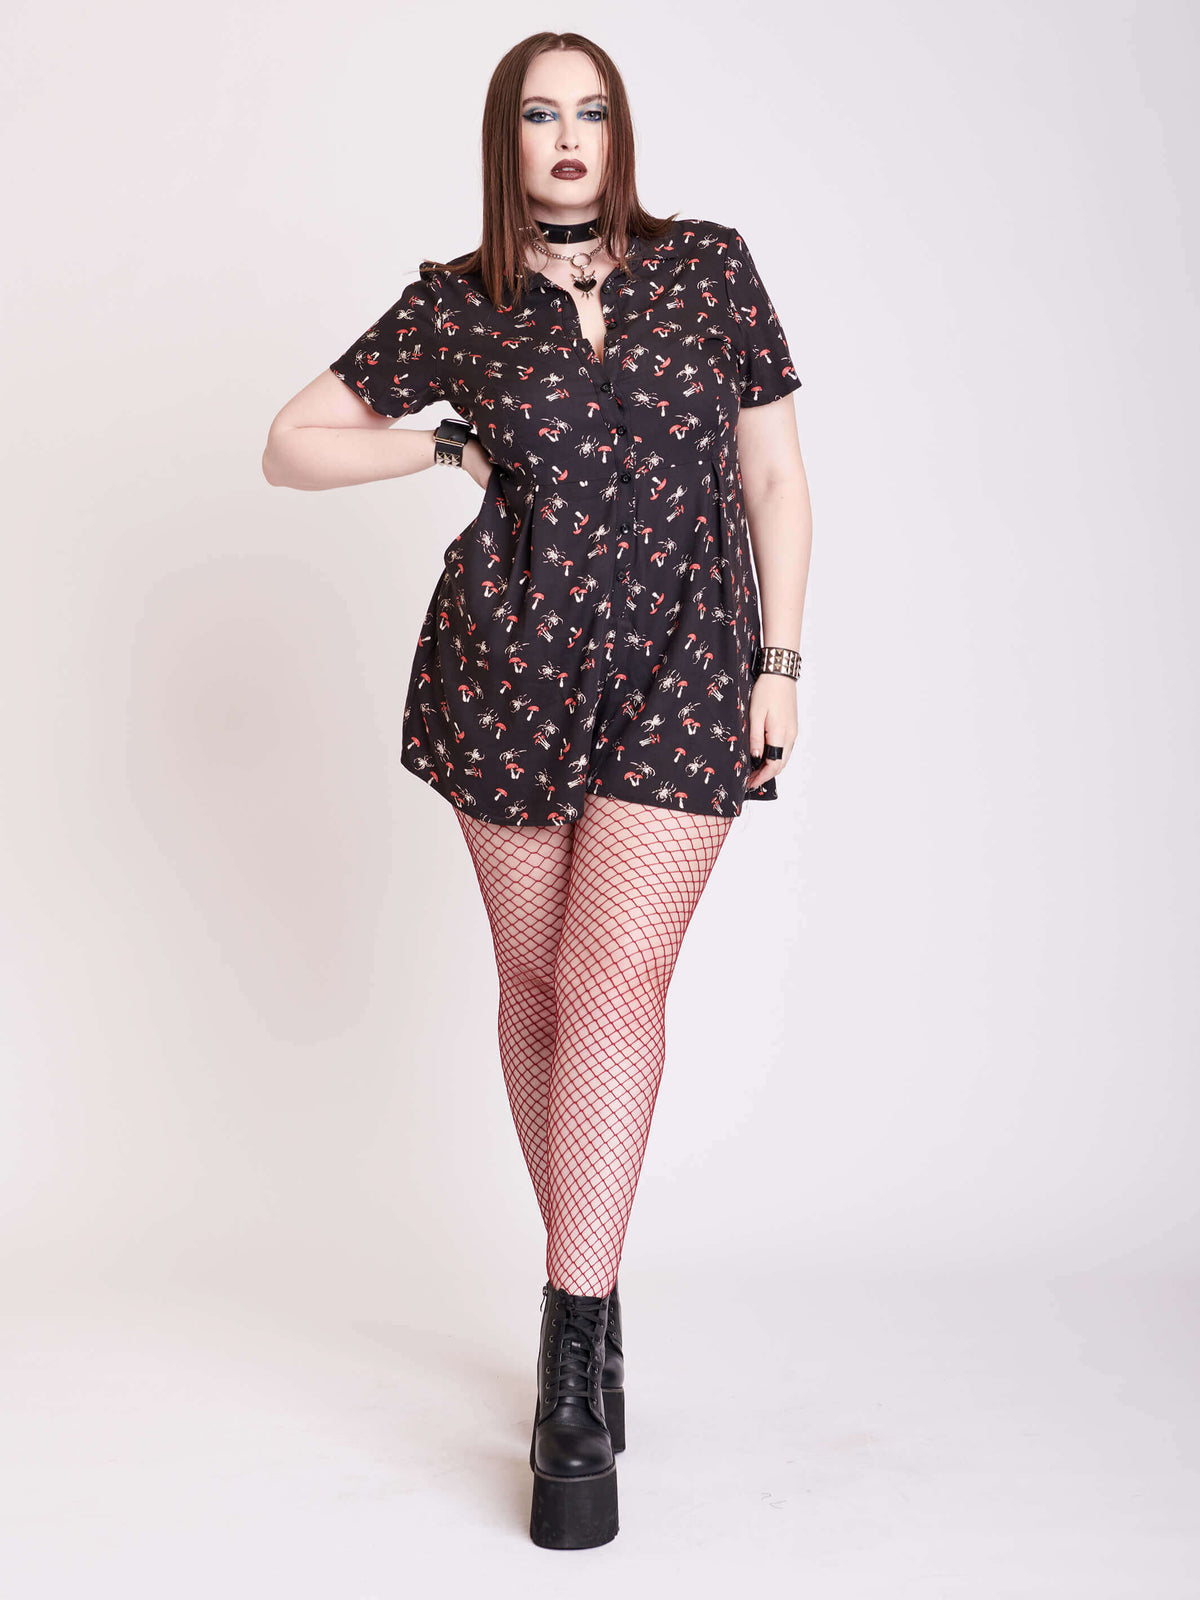 Black button up romper with scorpian and mushroom print